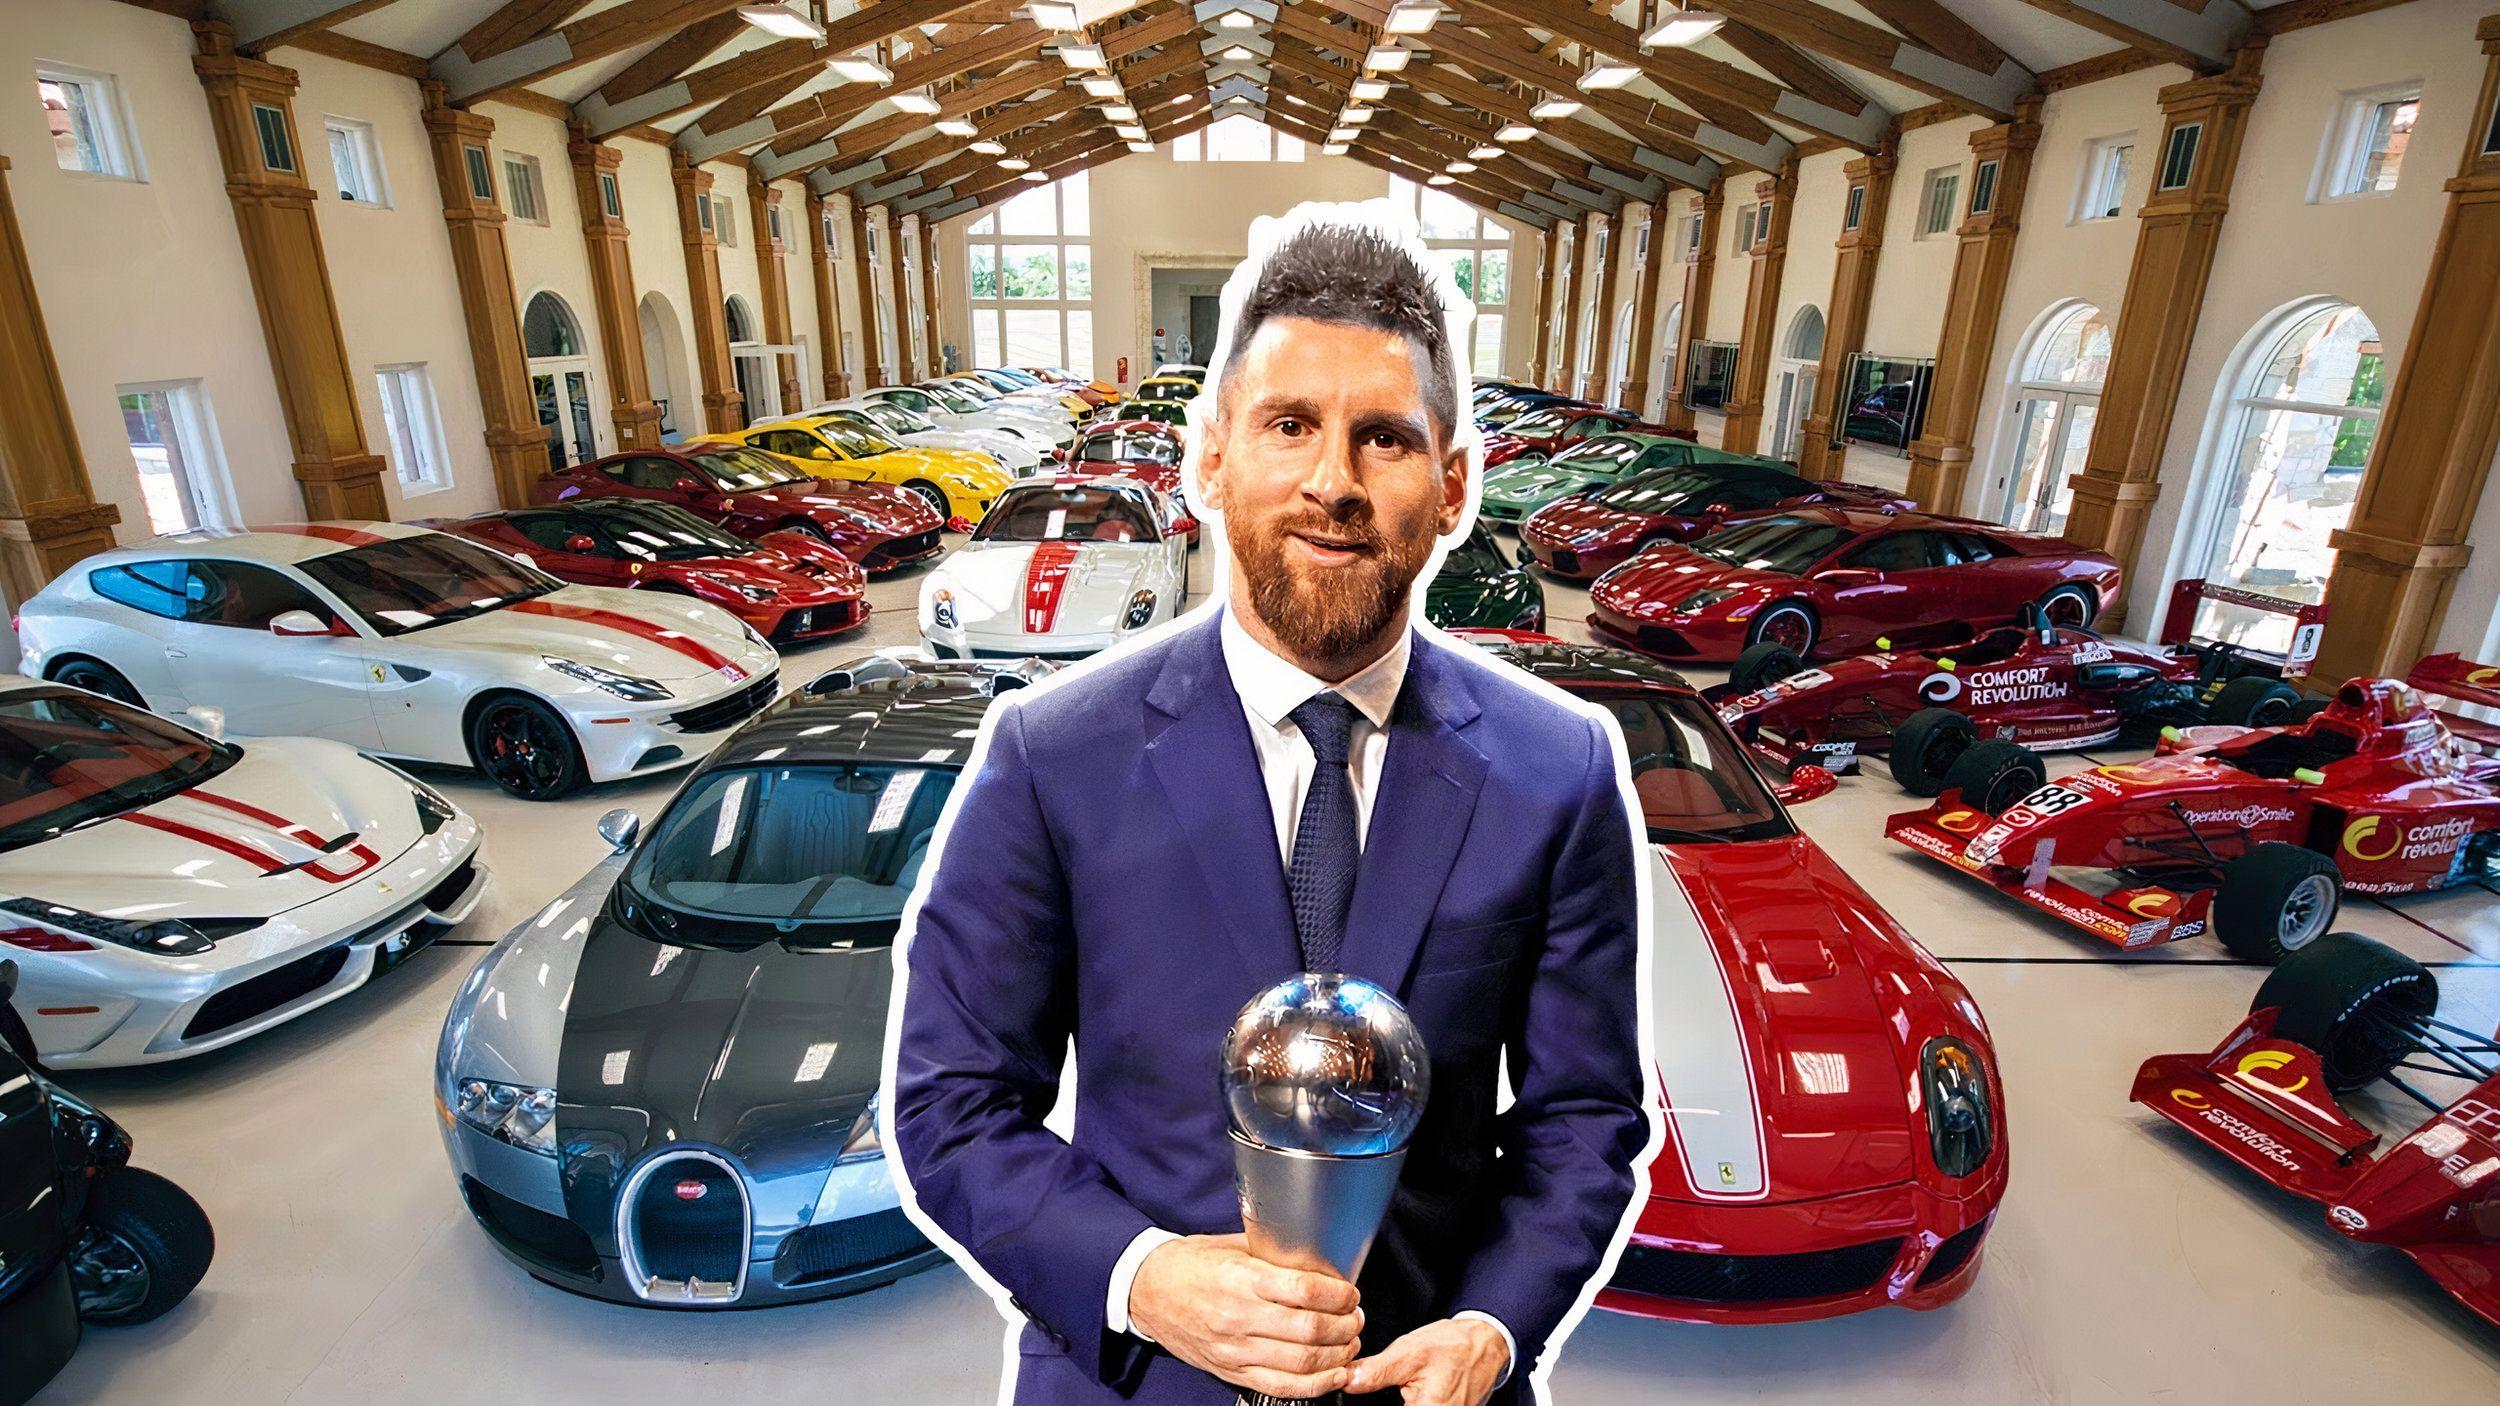 Messi Lifts the FIFA World Cup 2022: A Glimpse of Lionel Messi's Car Collection